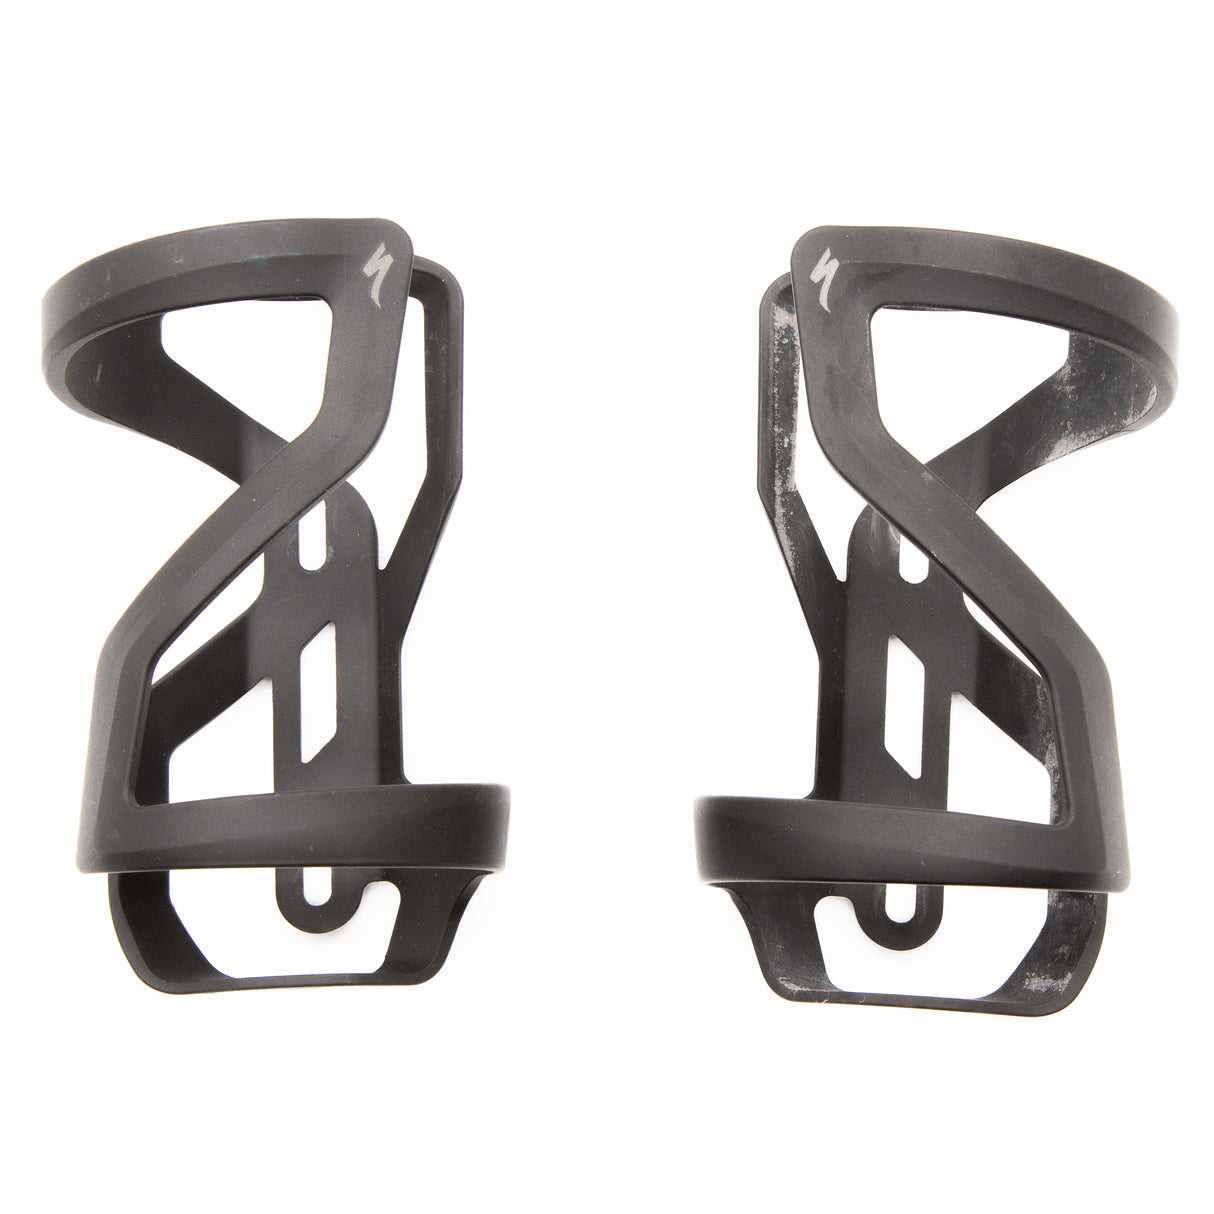 Specialized Zee II Bottle Cages Pair Right and Left Load Black Matte 83g